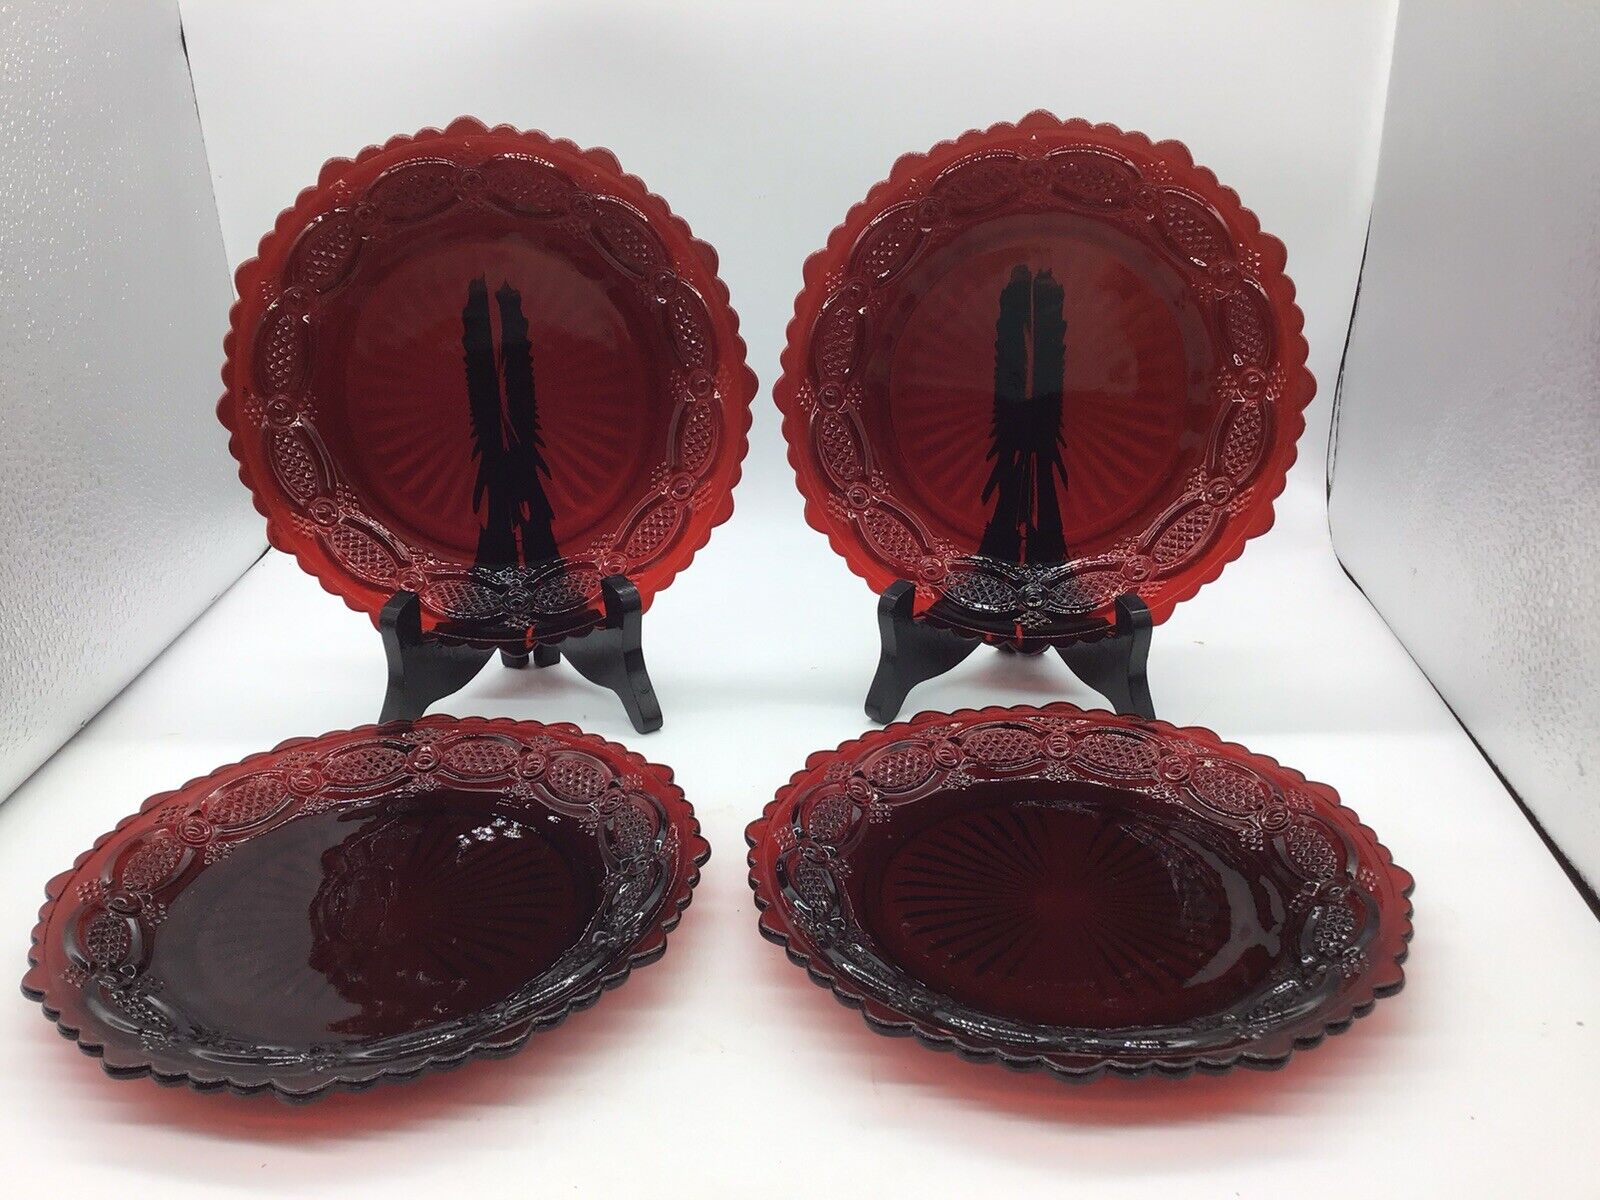 Avon 1876 Cape Cod Collection Ruby Red Glass Dessert Plates (1980)